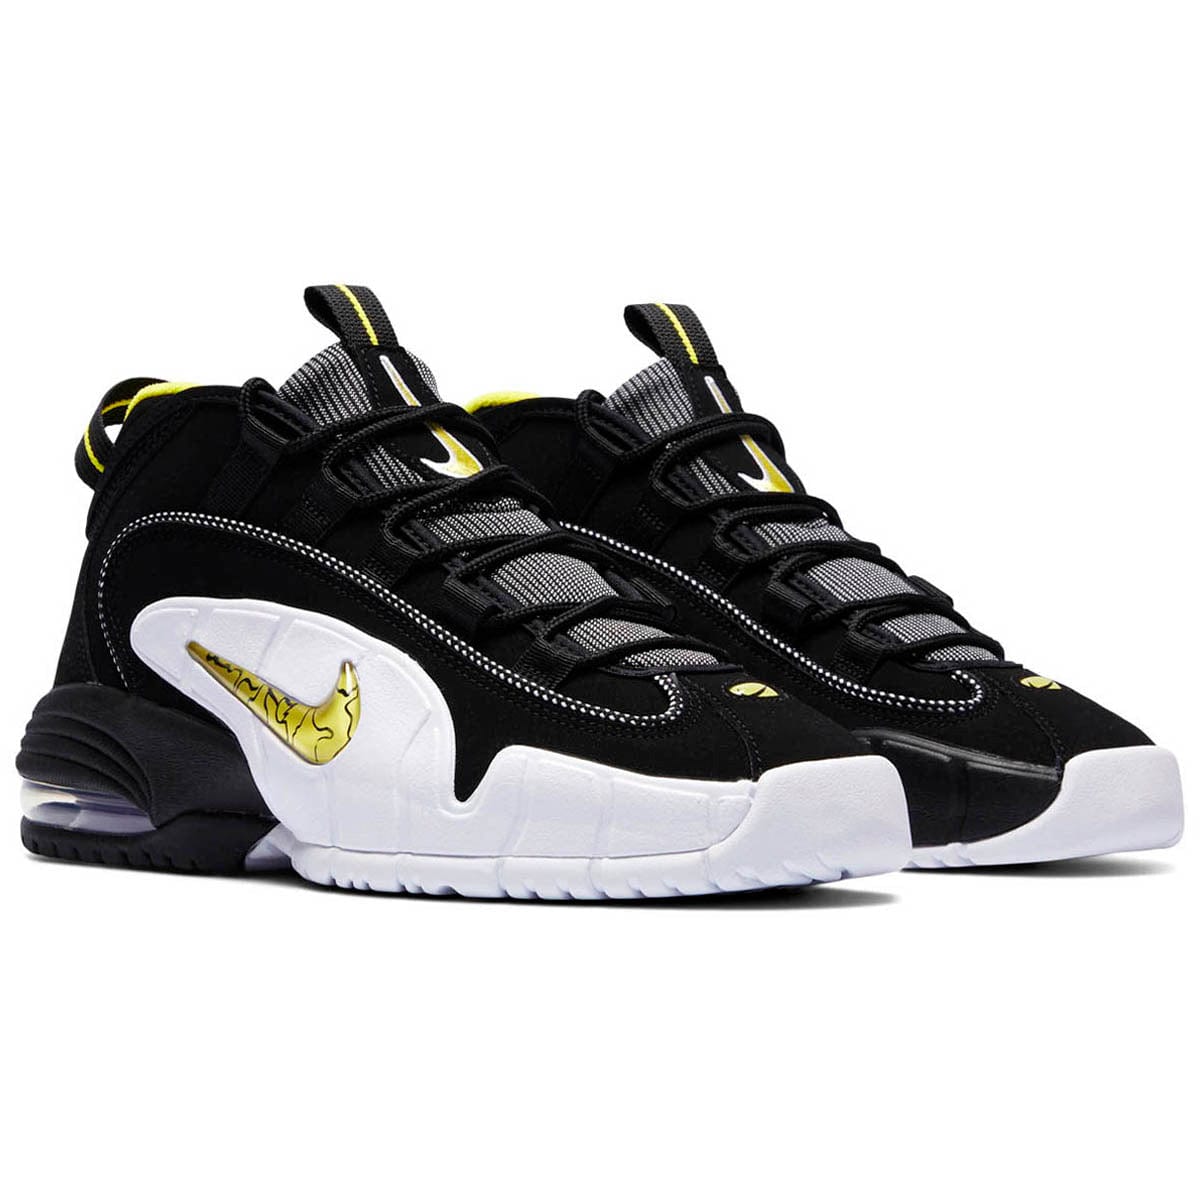 Nike Air Max Penny 1 in Black - Size 7.5